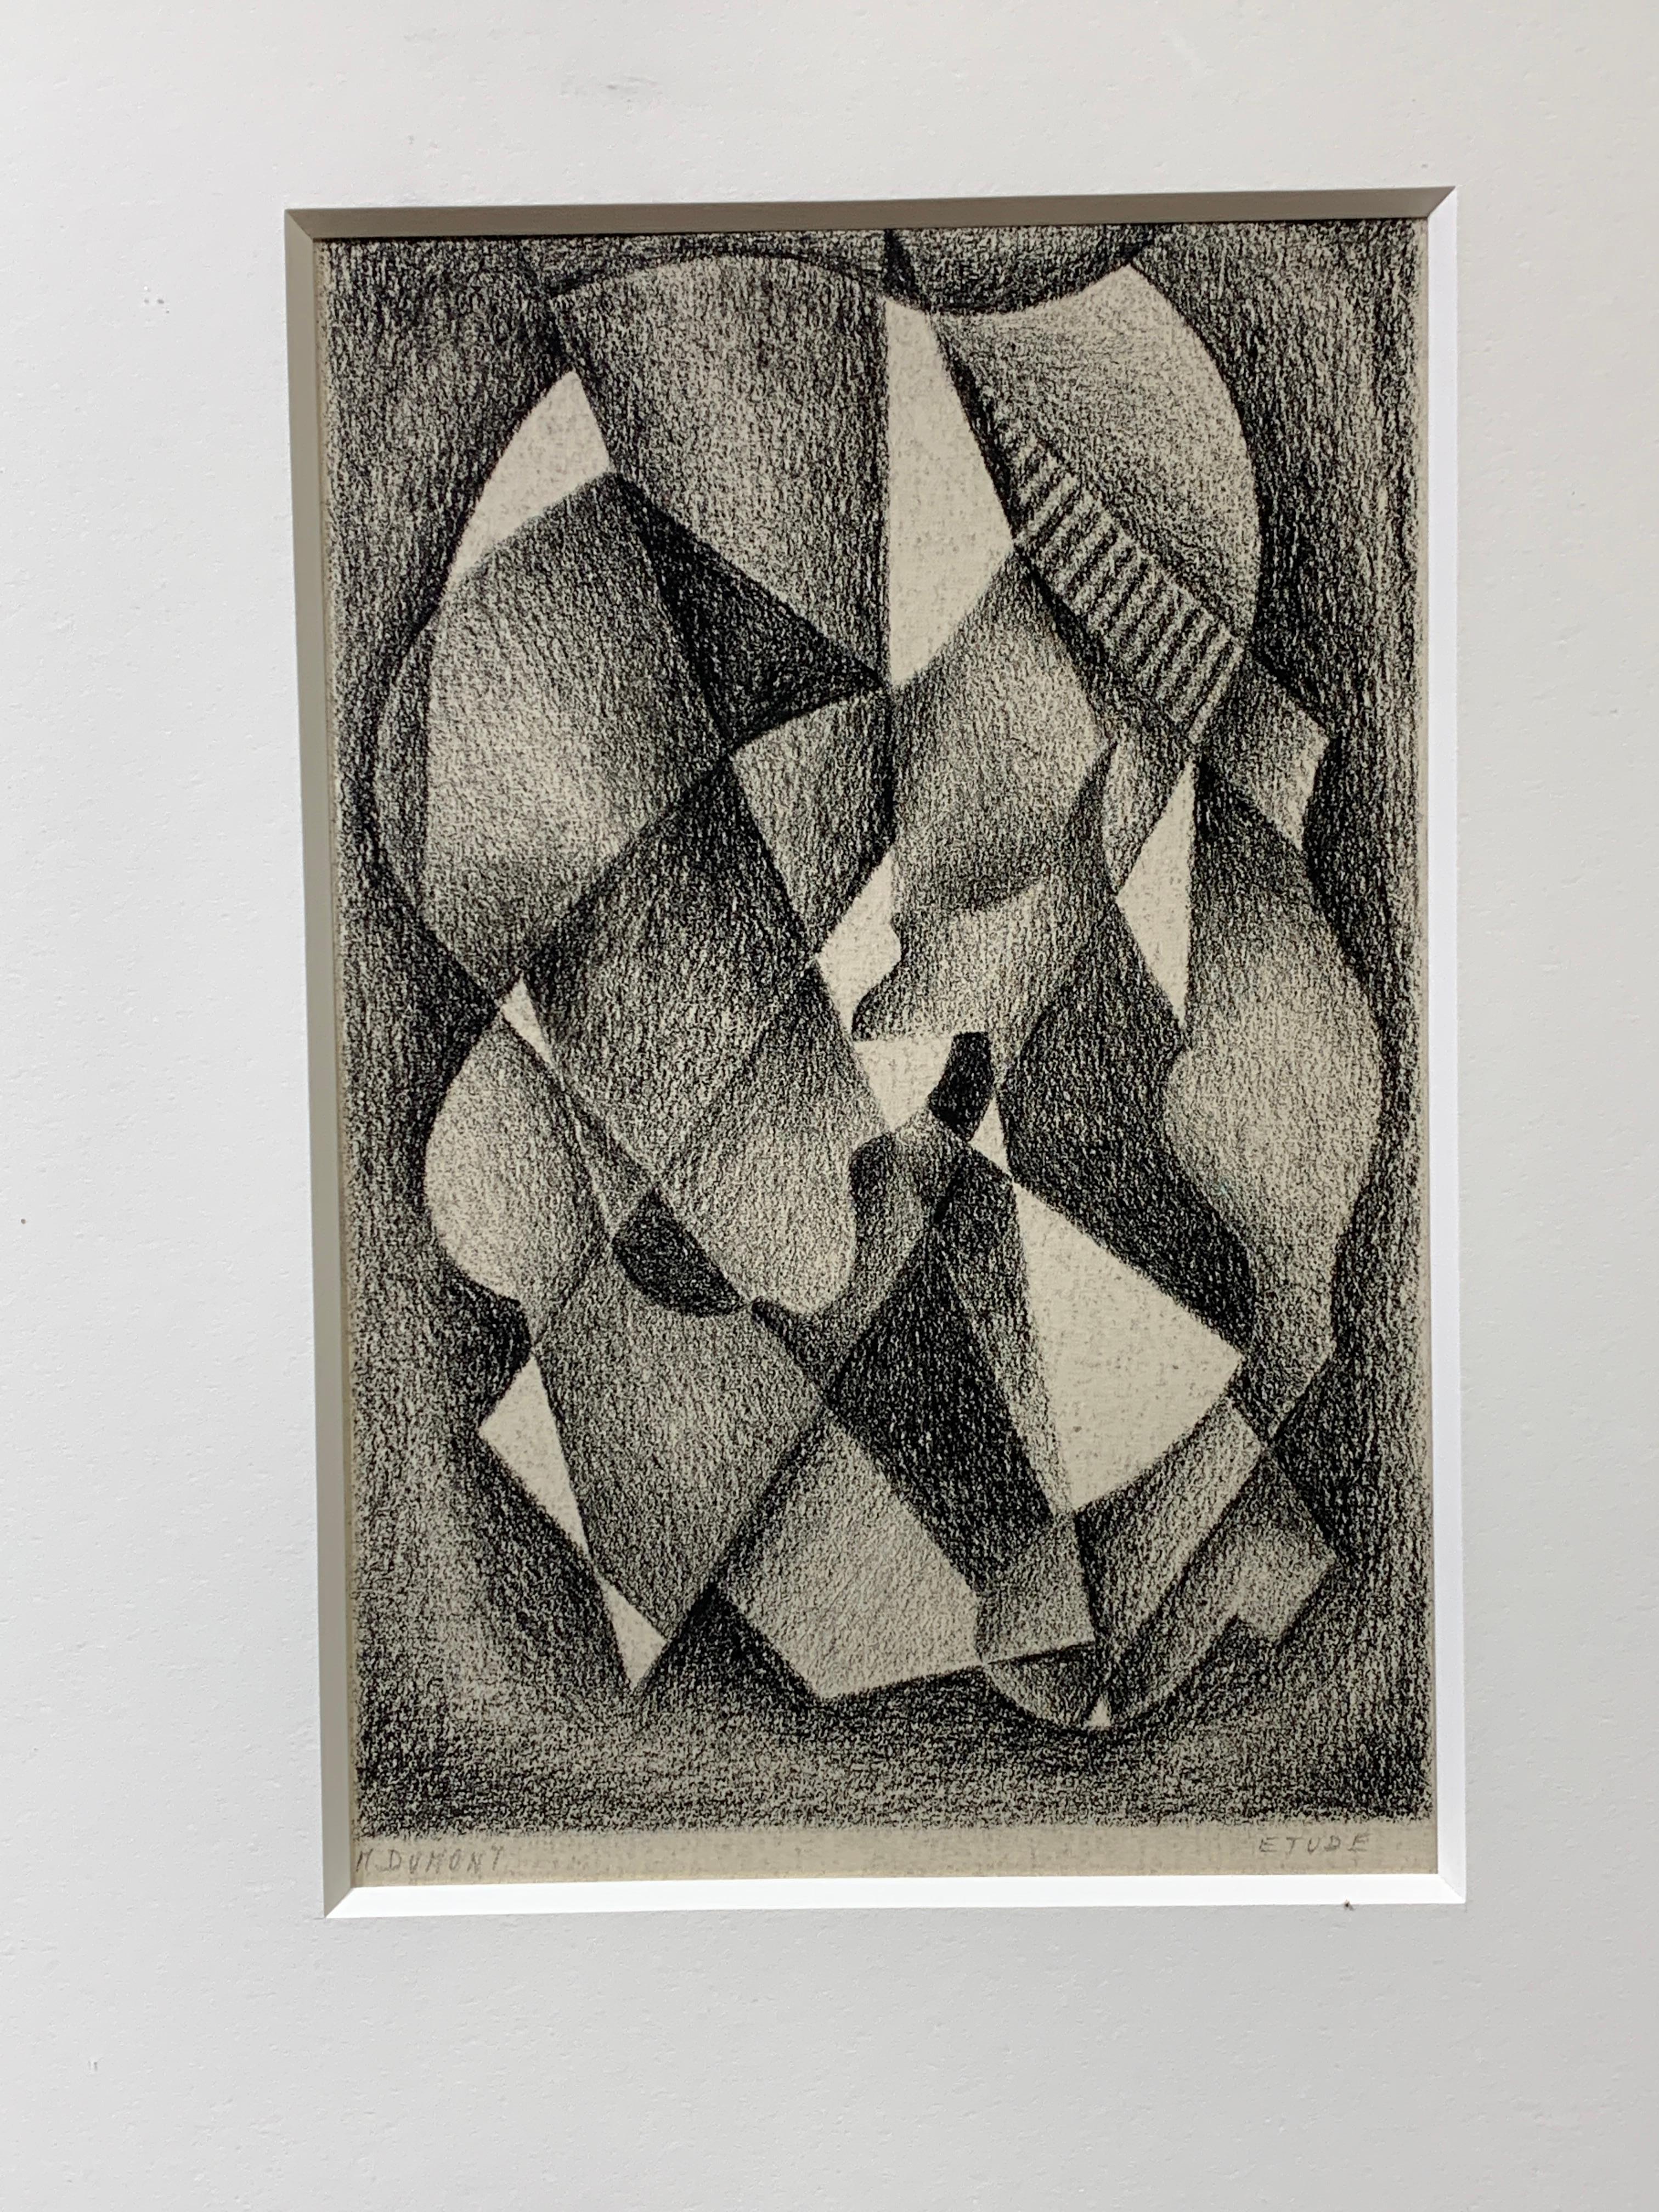 20th century Belgium, Black and White Abstract pencil drawing, Etude - Art by Marcel Dumont